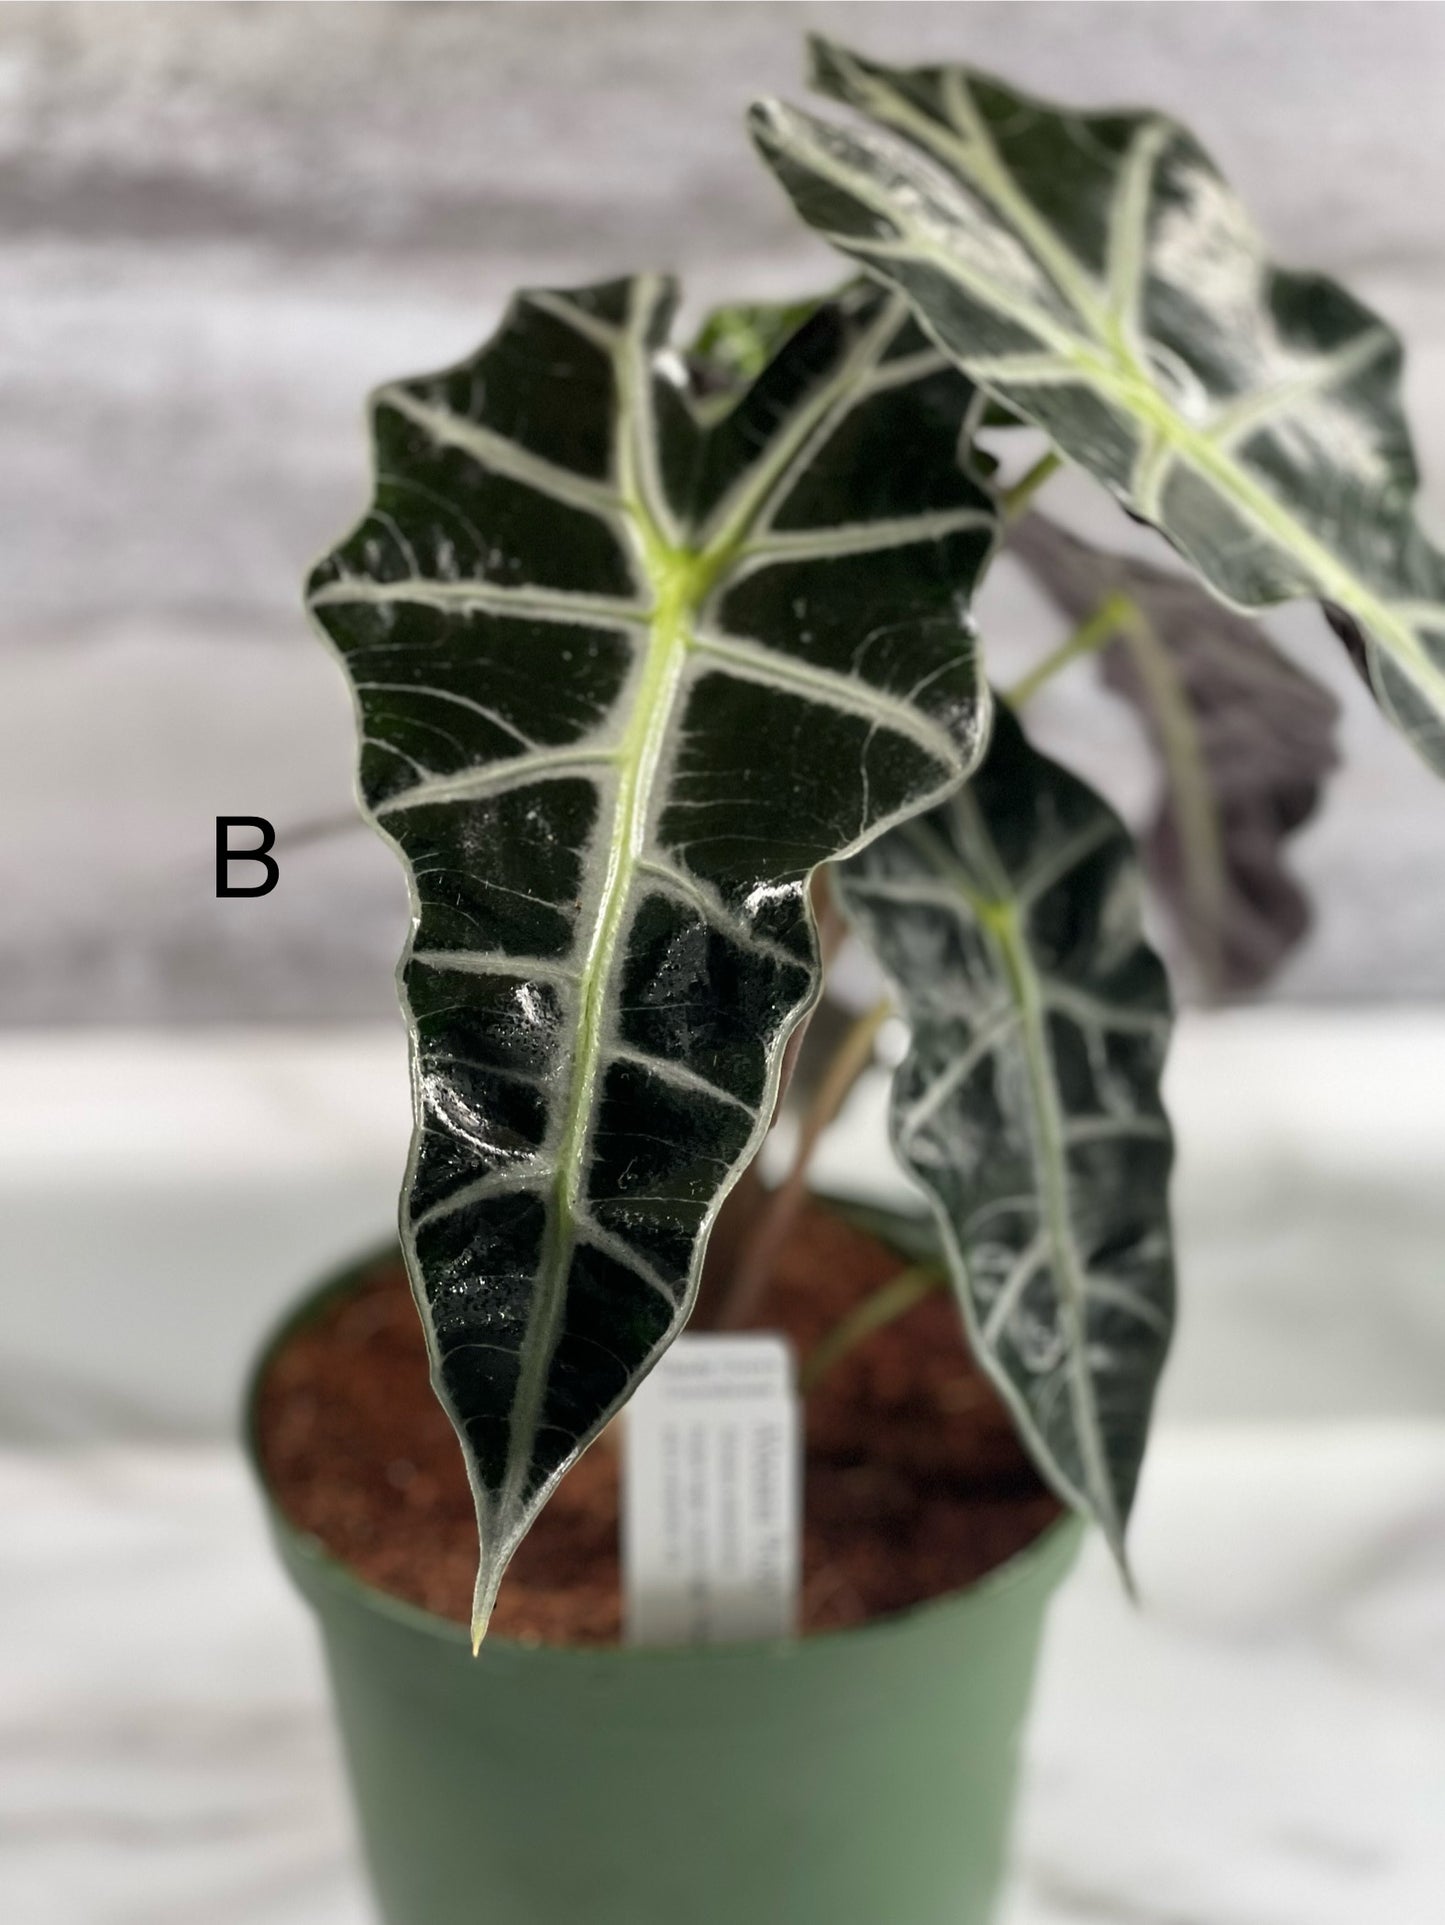 Alocasia “Polly” 6” pot *Pickup ONLY